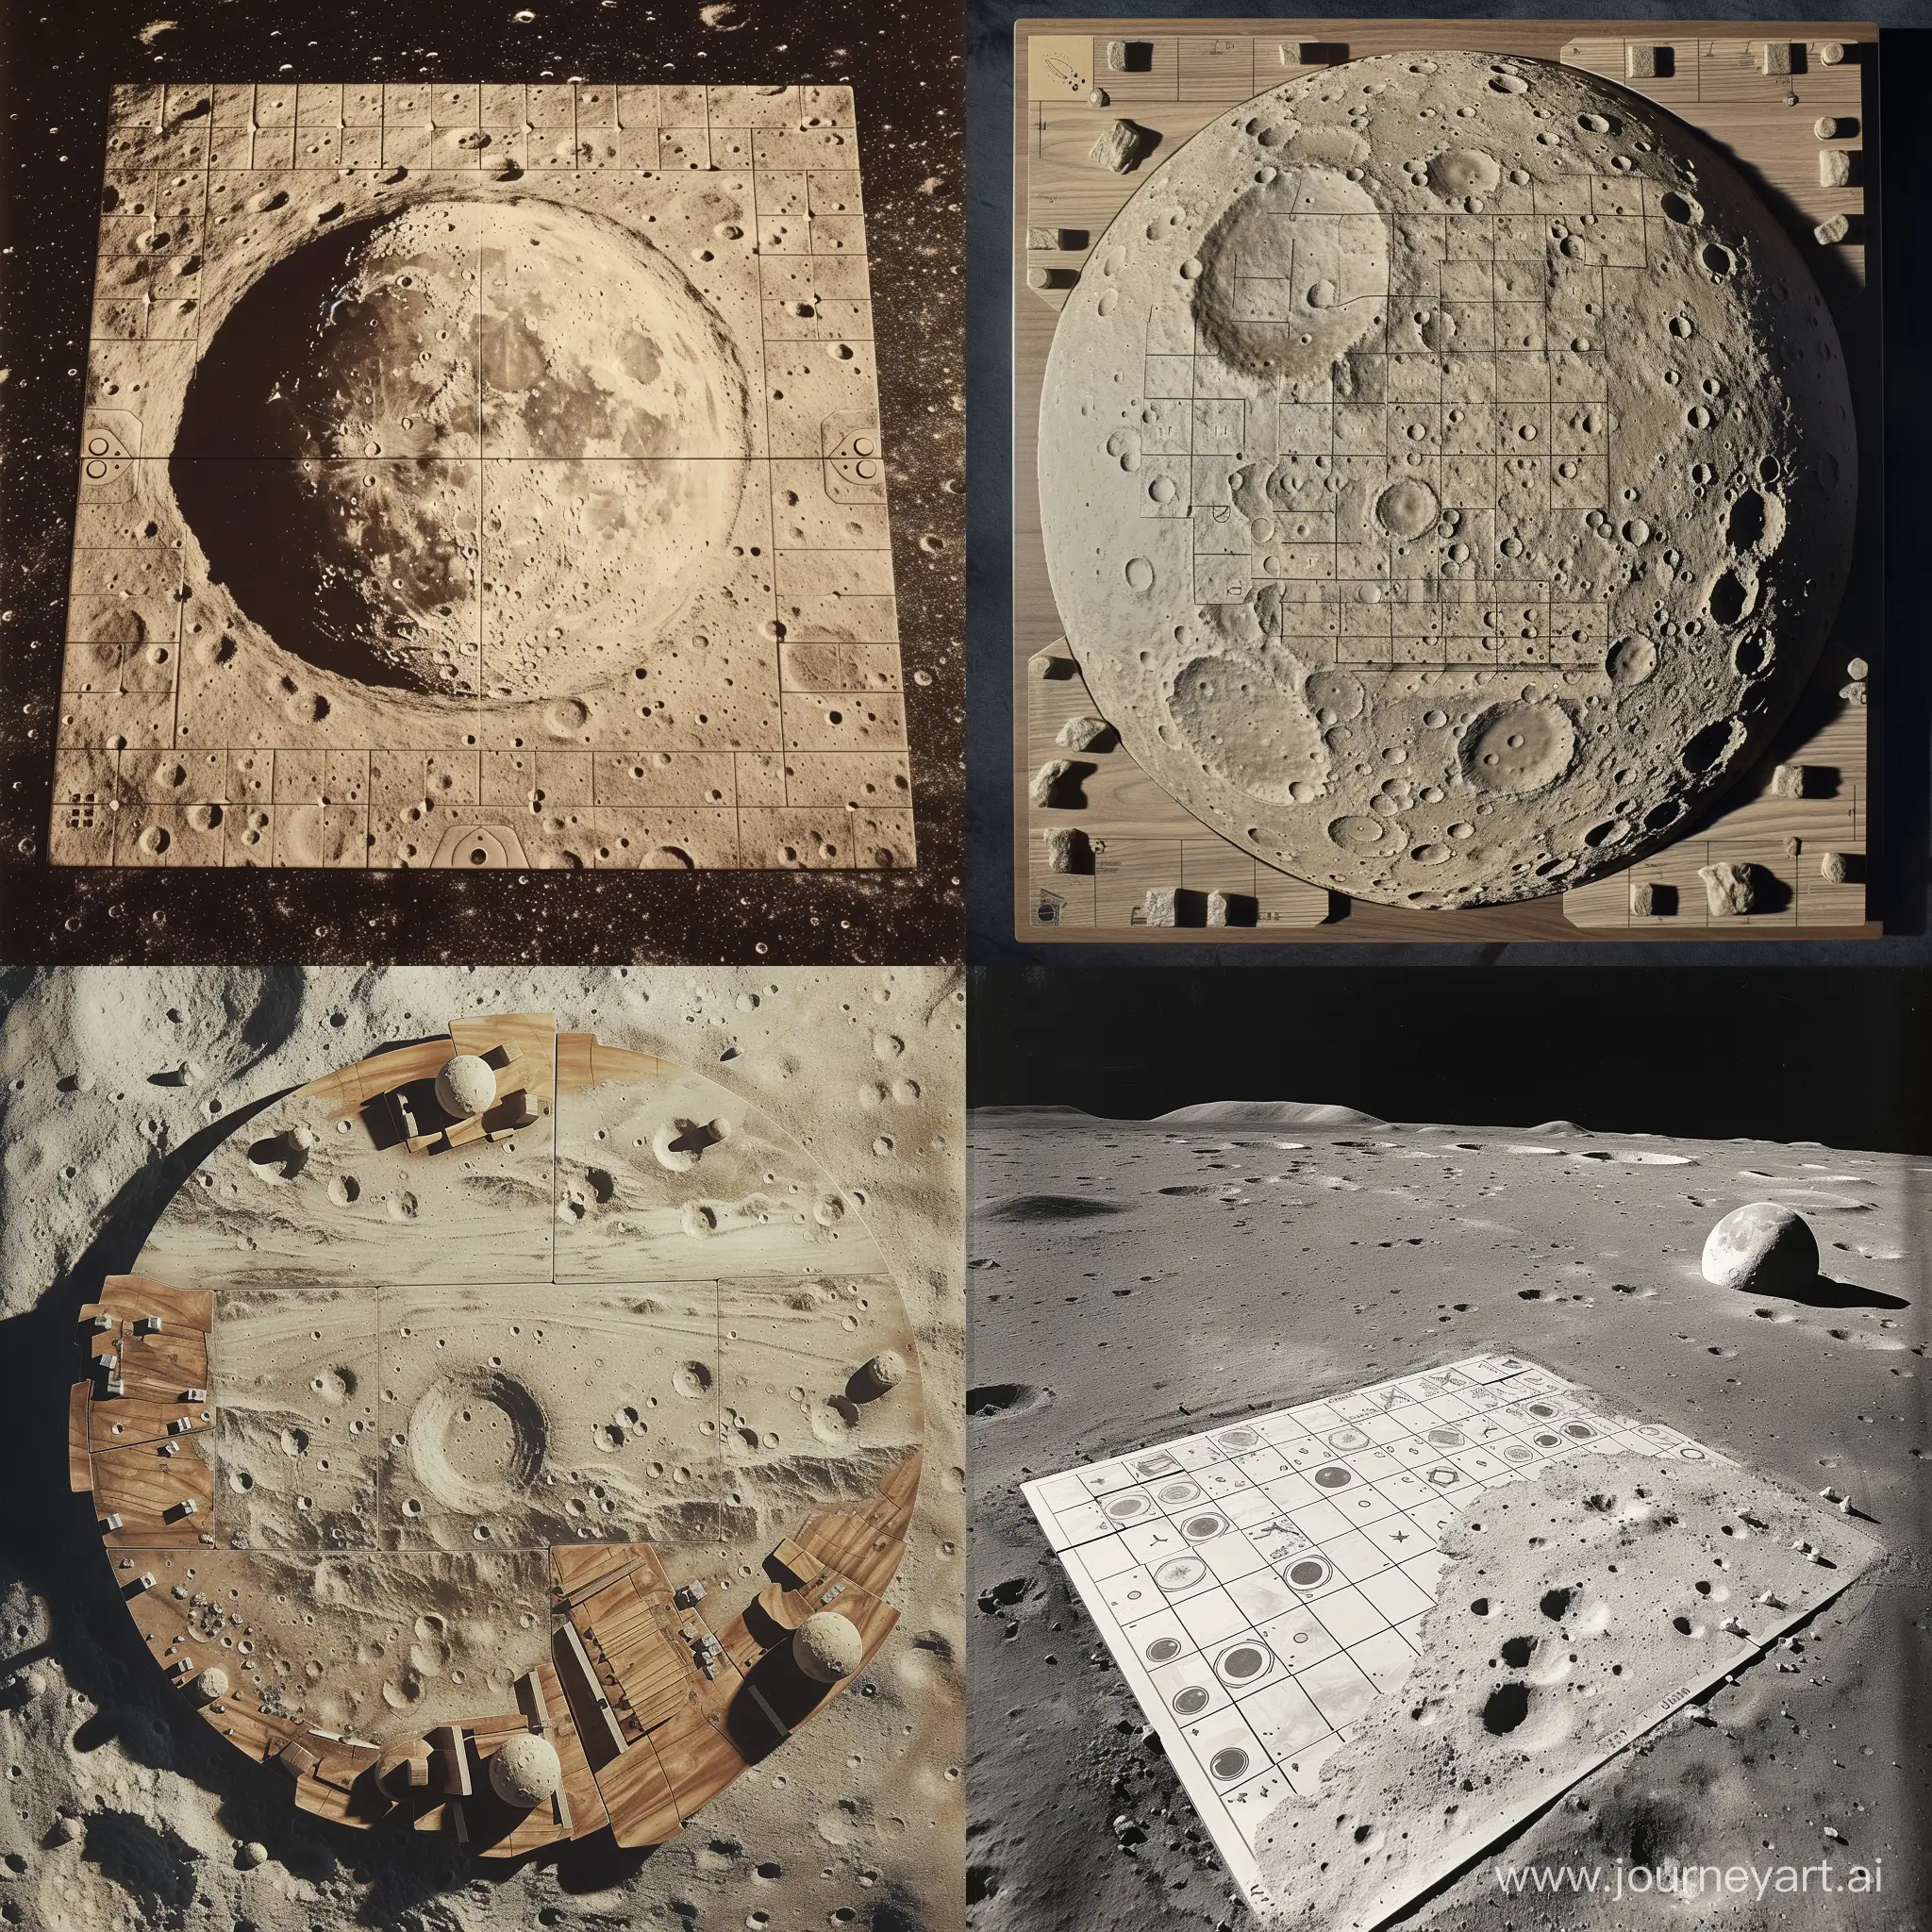 Lunar-Surface-Board-Game-Field-View-from-Above